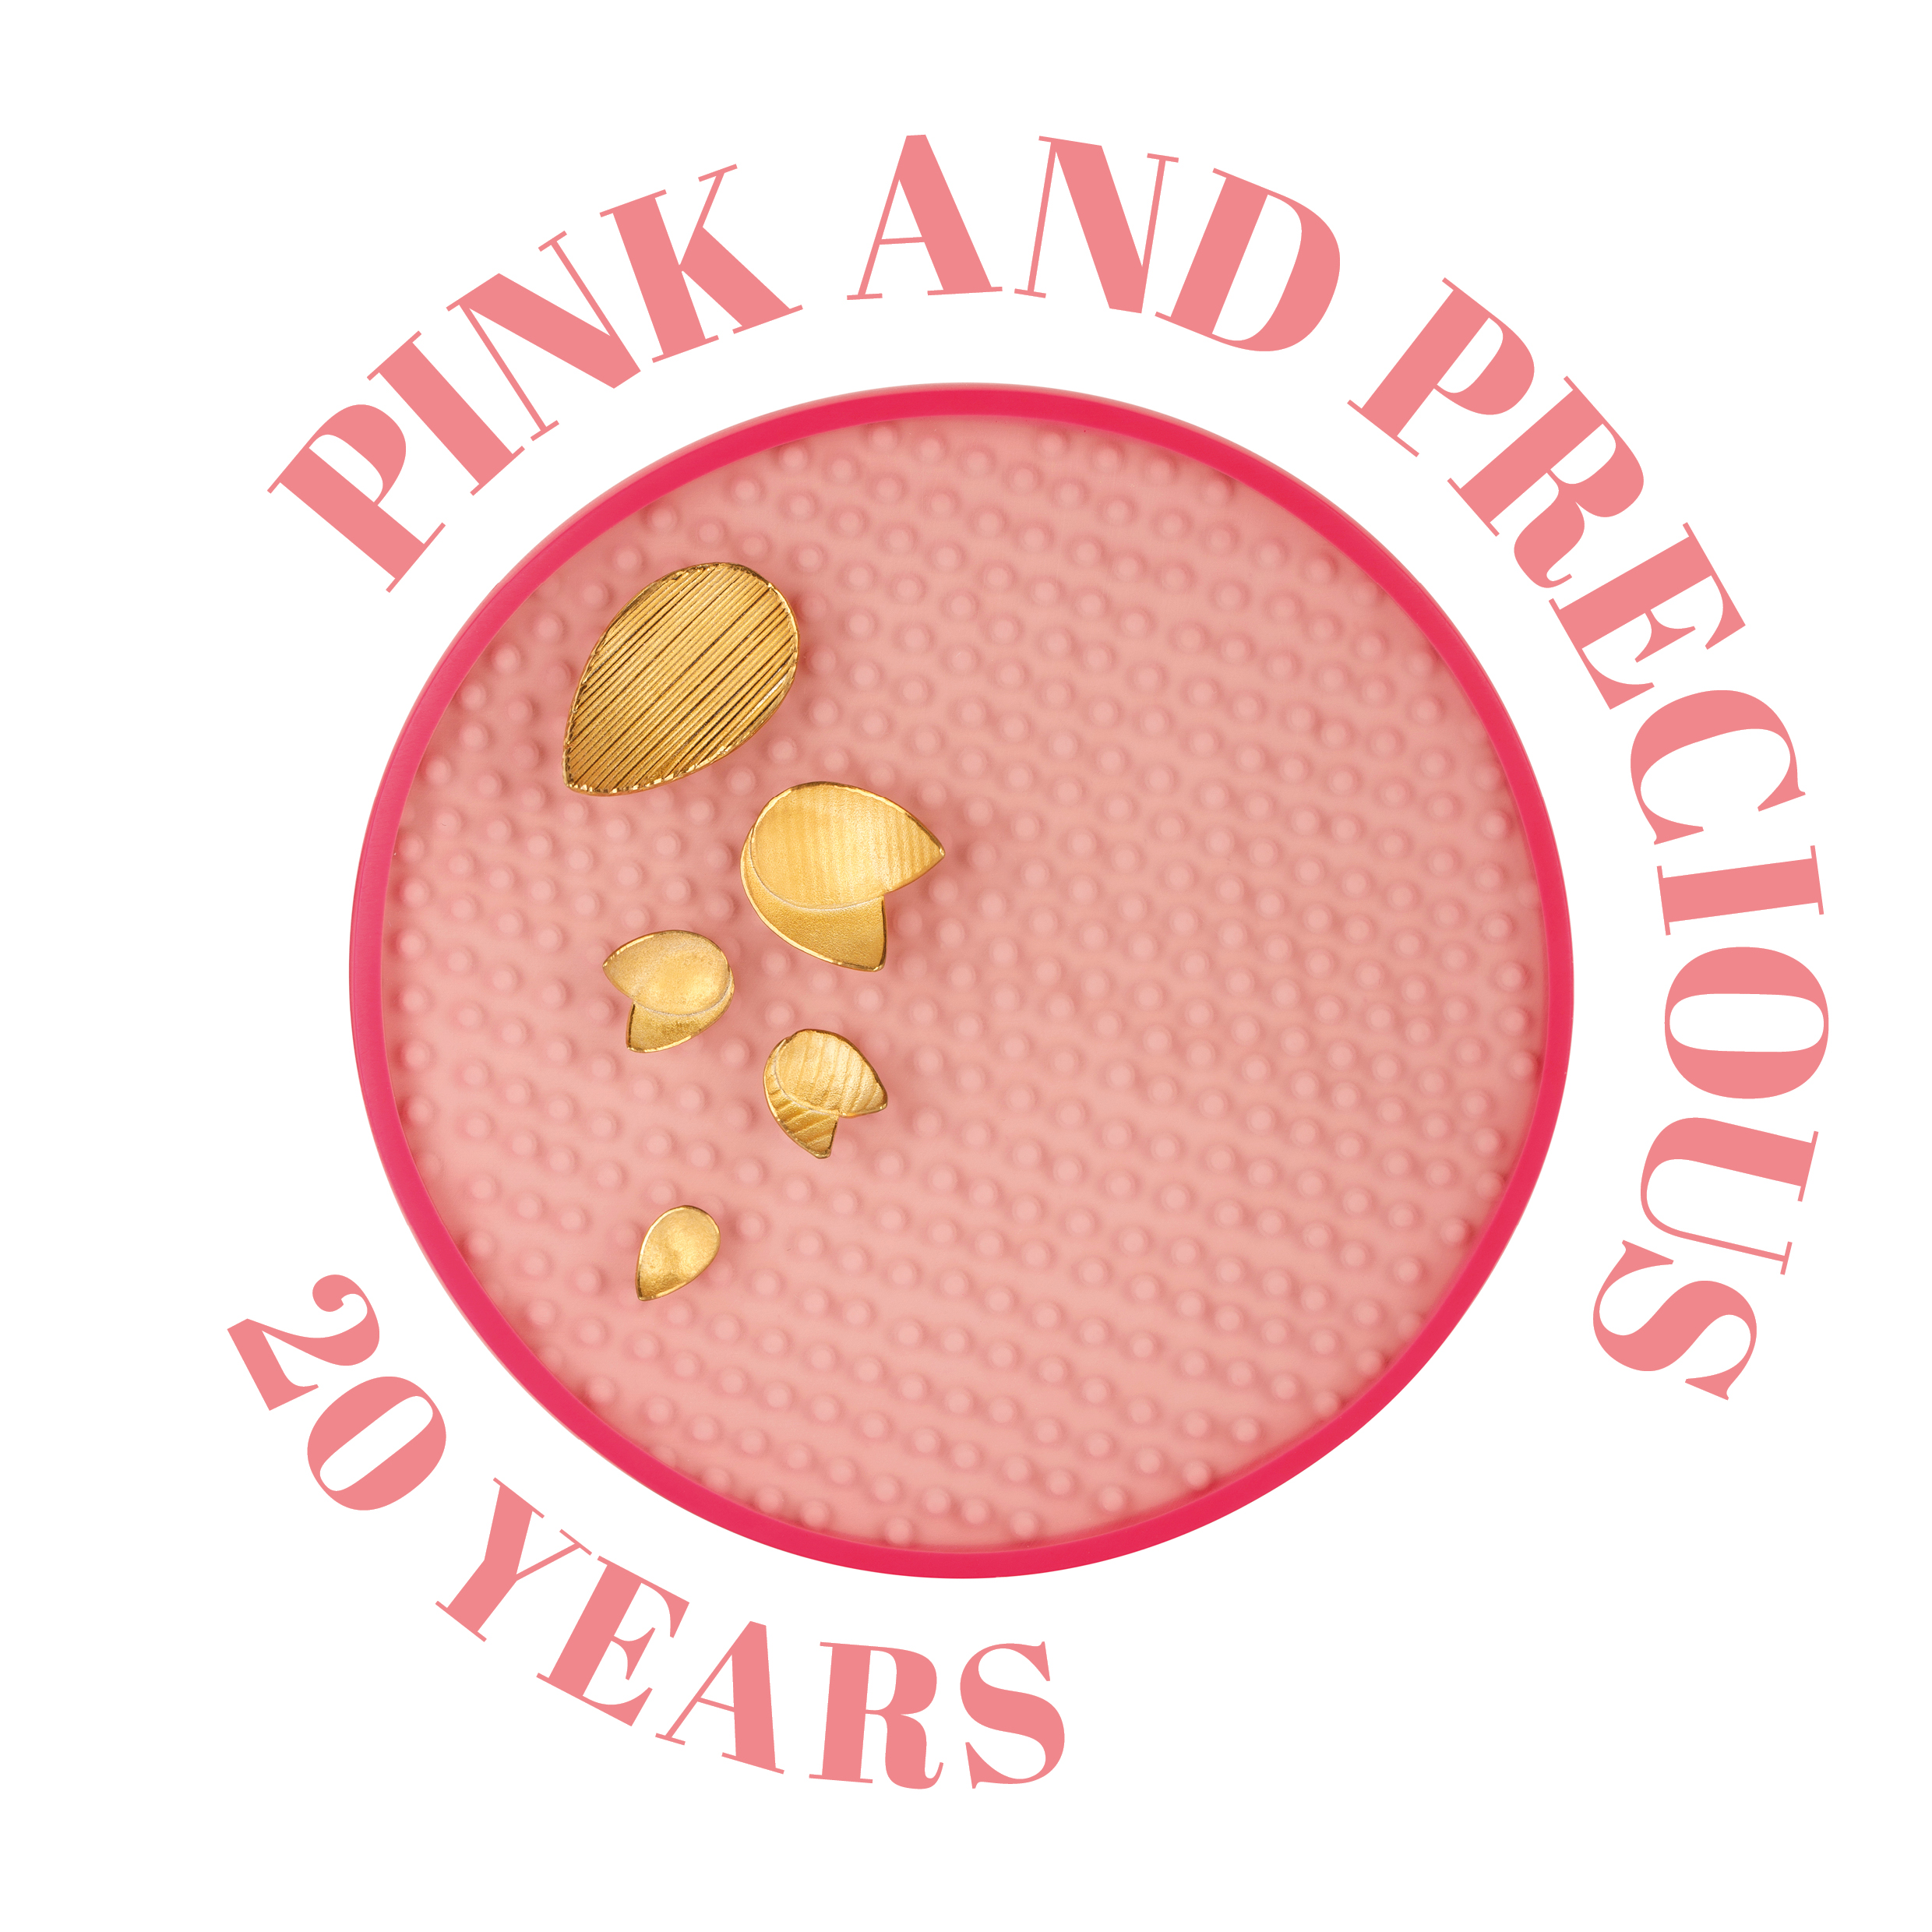 20 Years: Pink and Precious